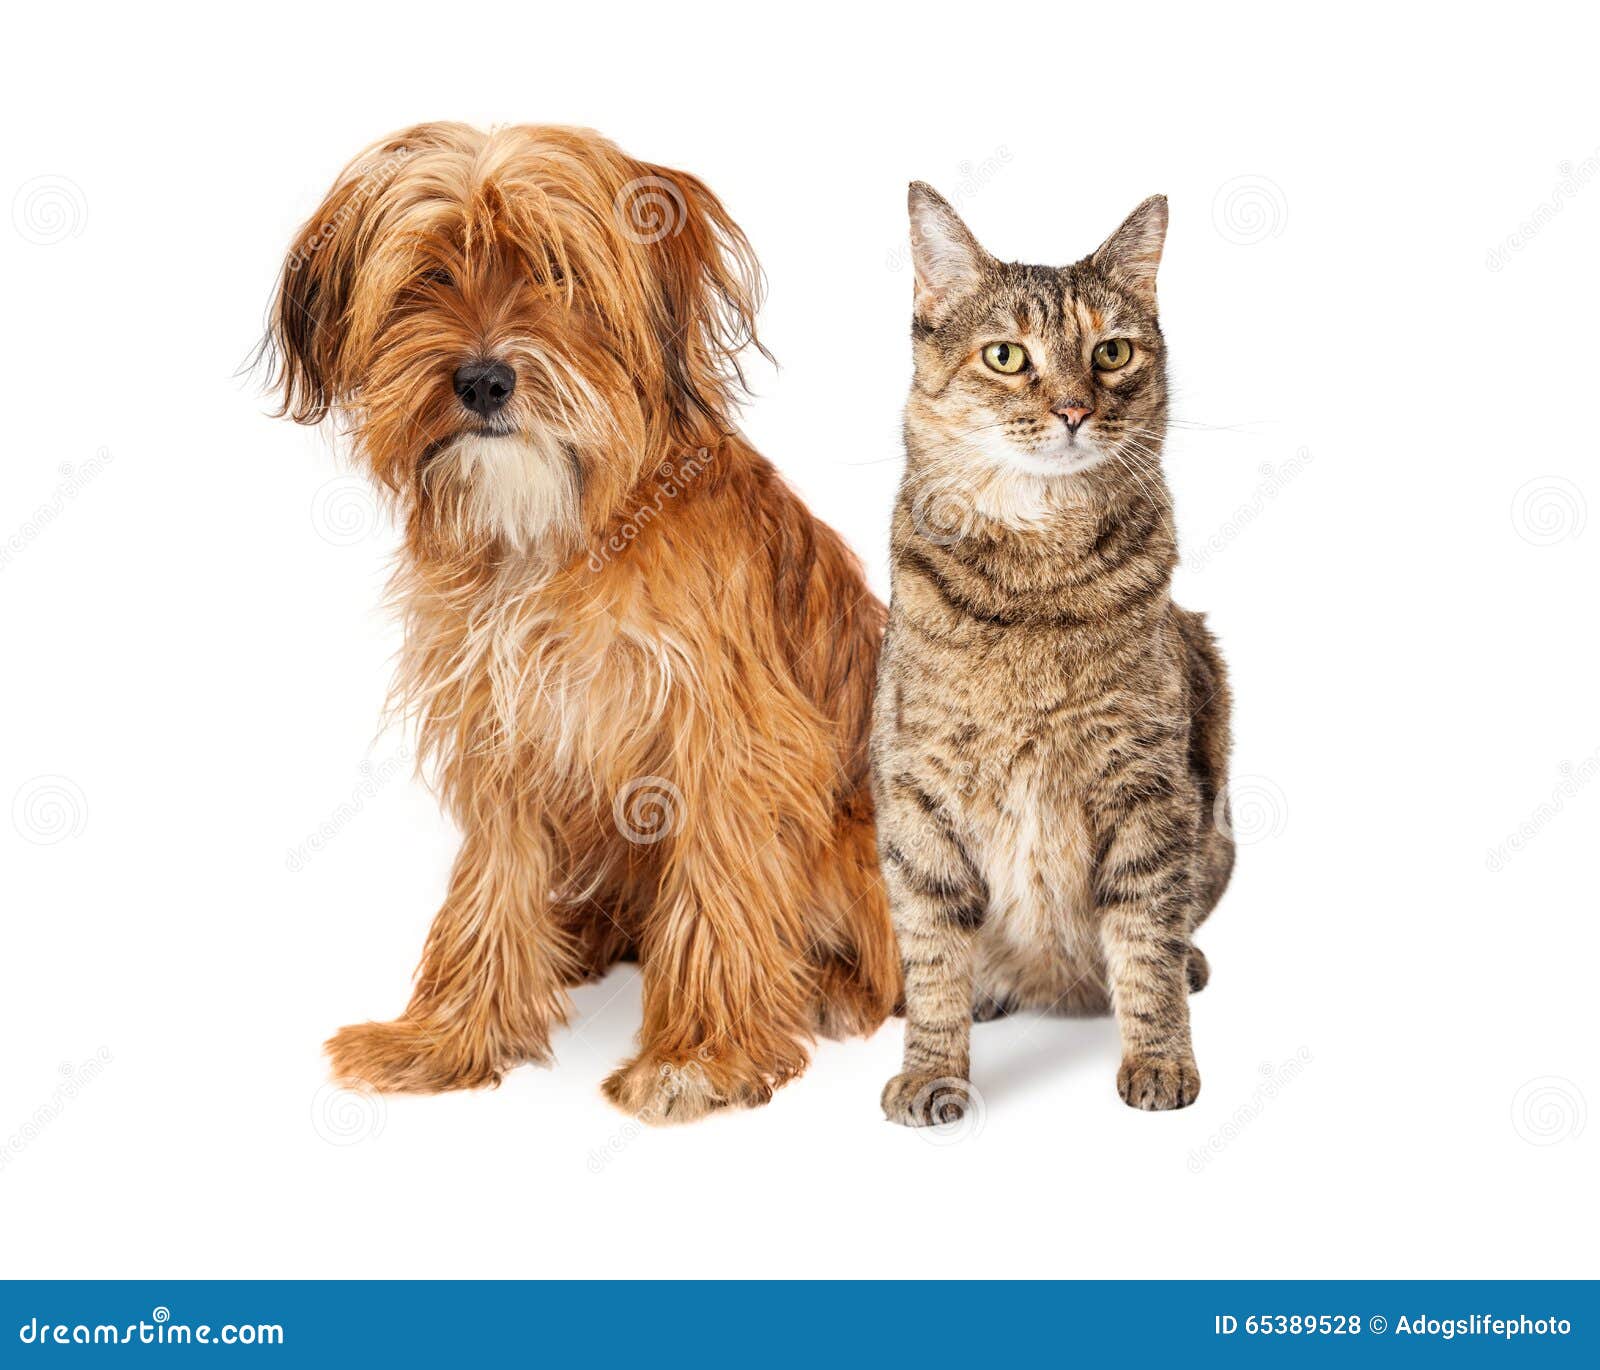  Shaggy  Dog And Tabby  Cat Sitting Together Stock Photo 